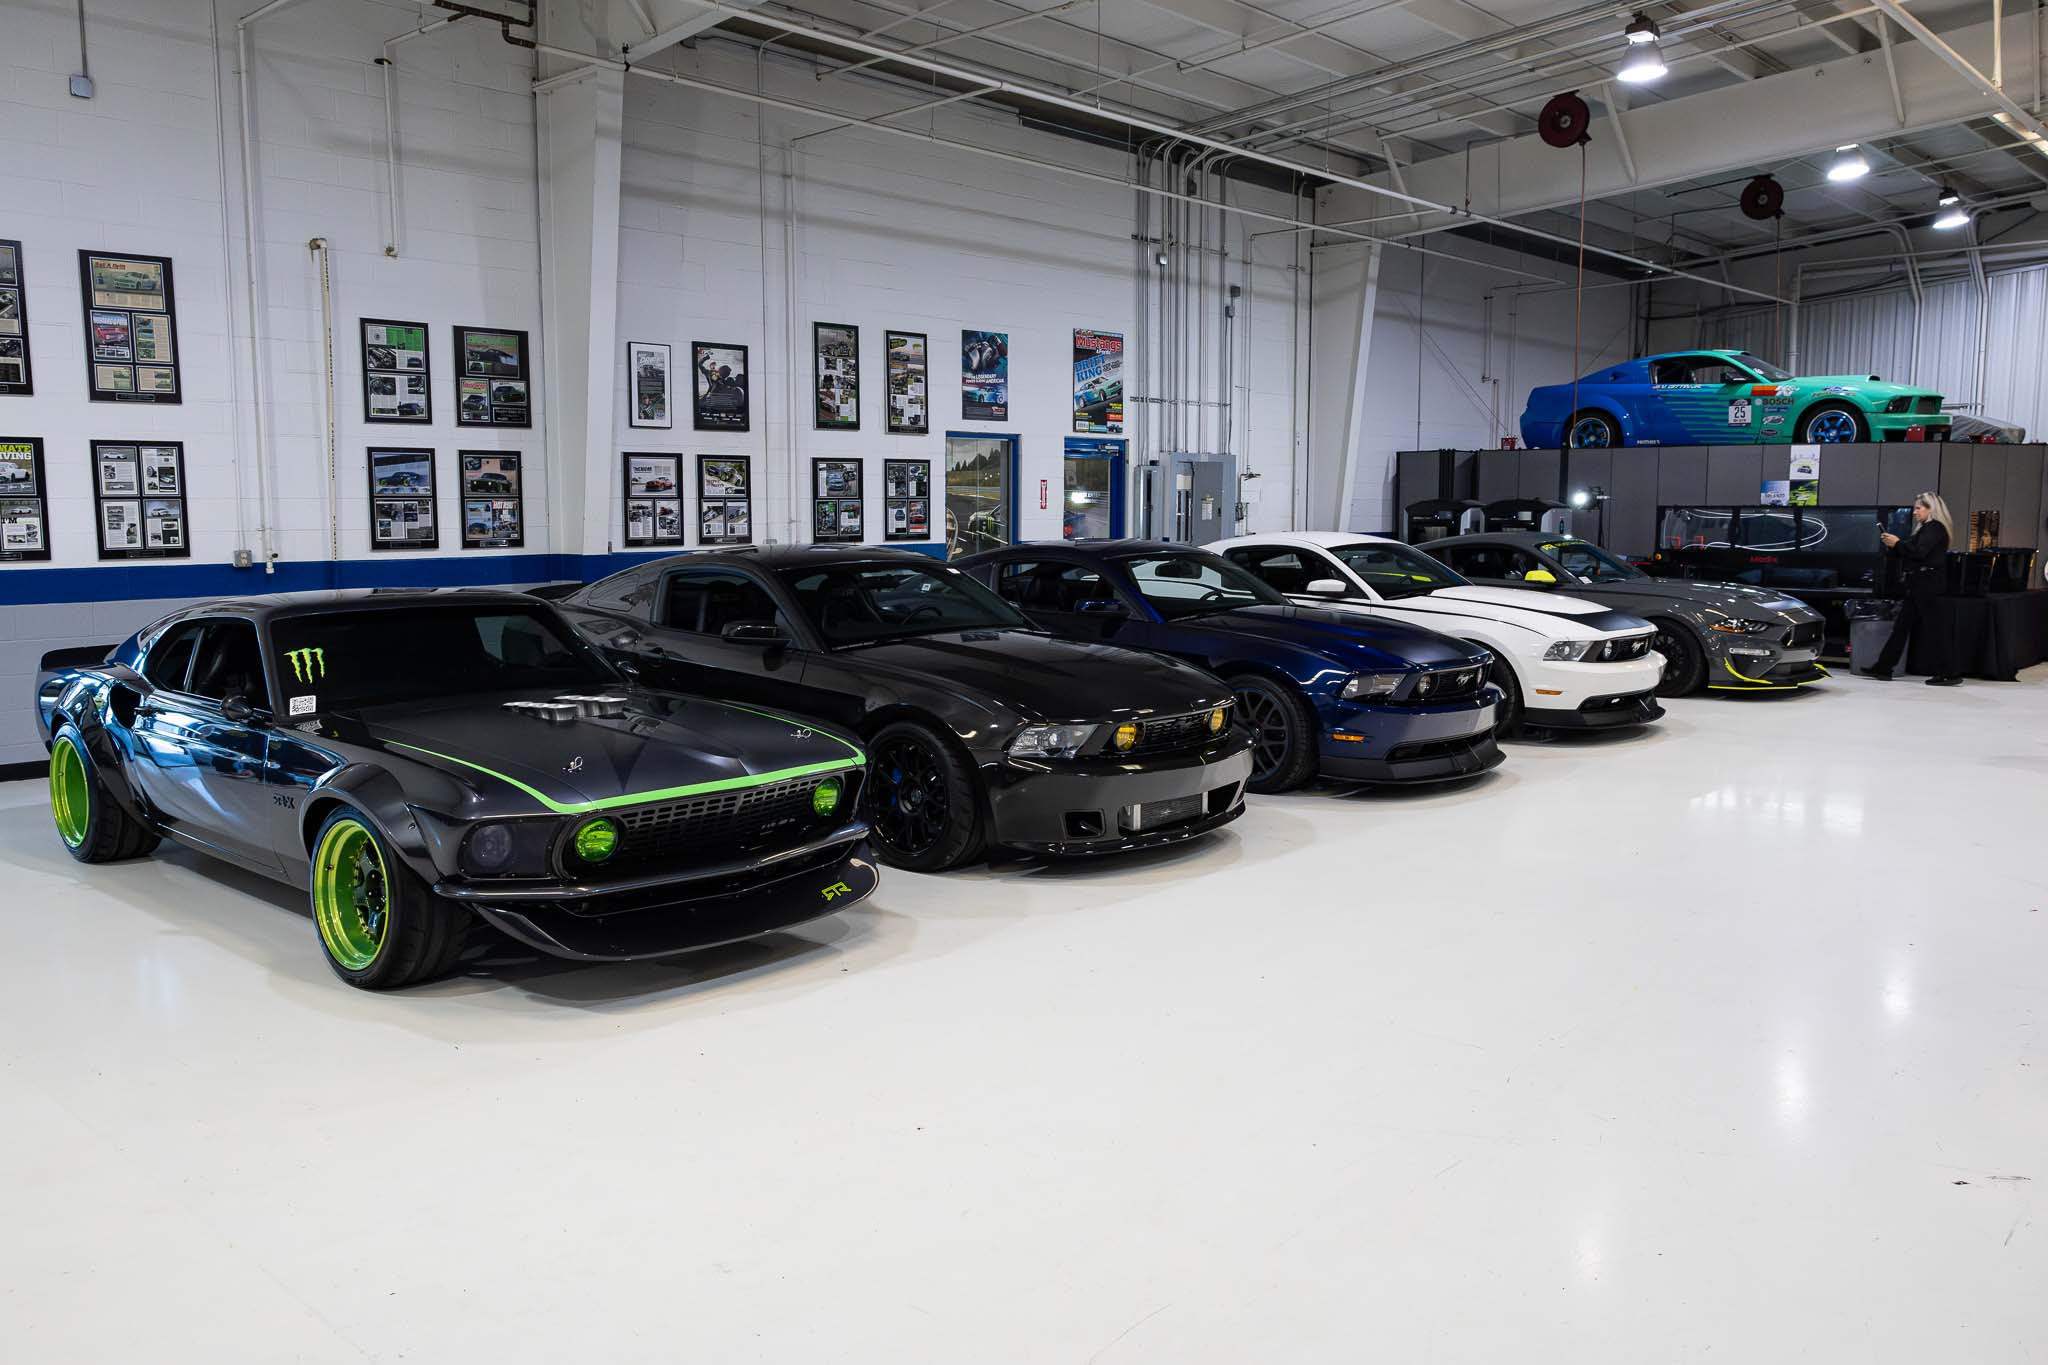 A lineup of RTR Mustangs including the RTR-X, RTR-C, and the first ever serialized Mustang RTR